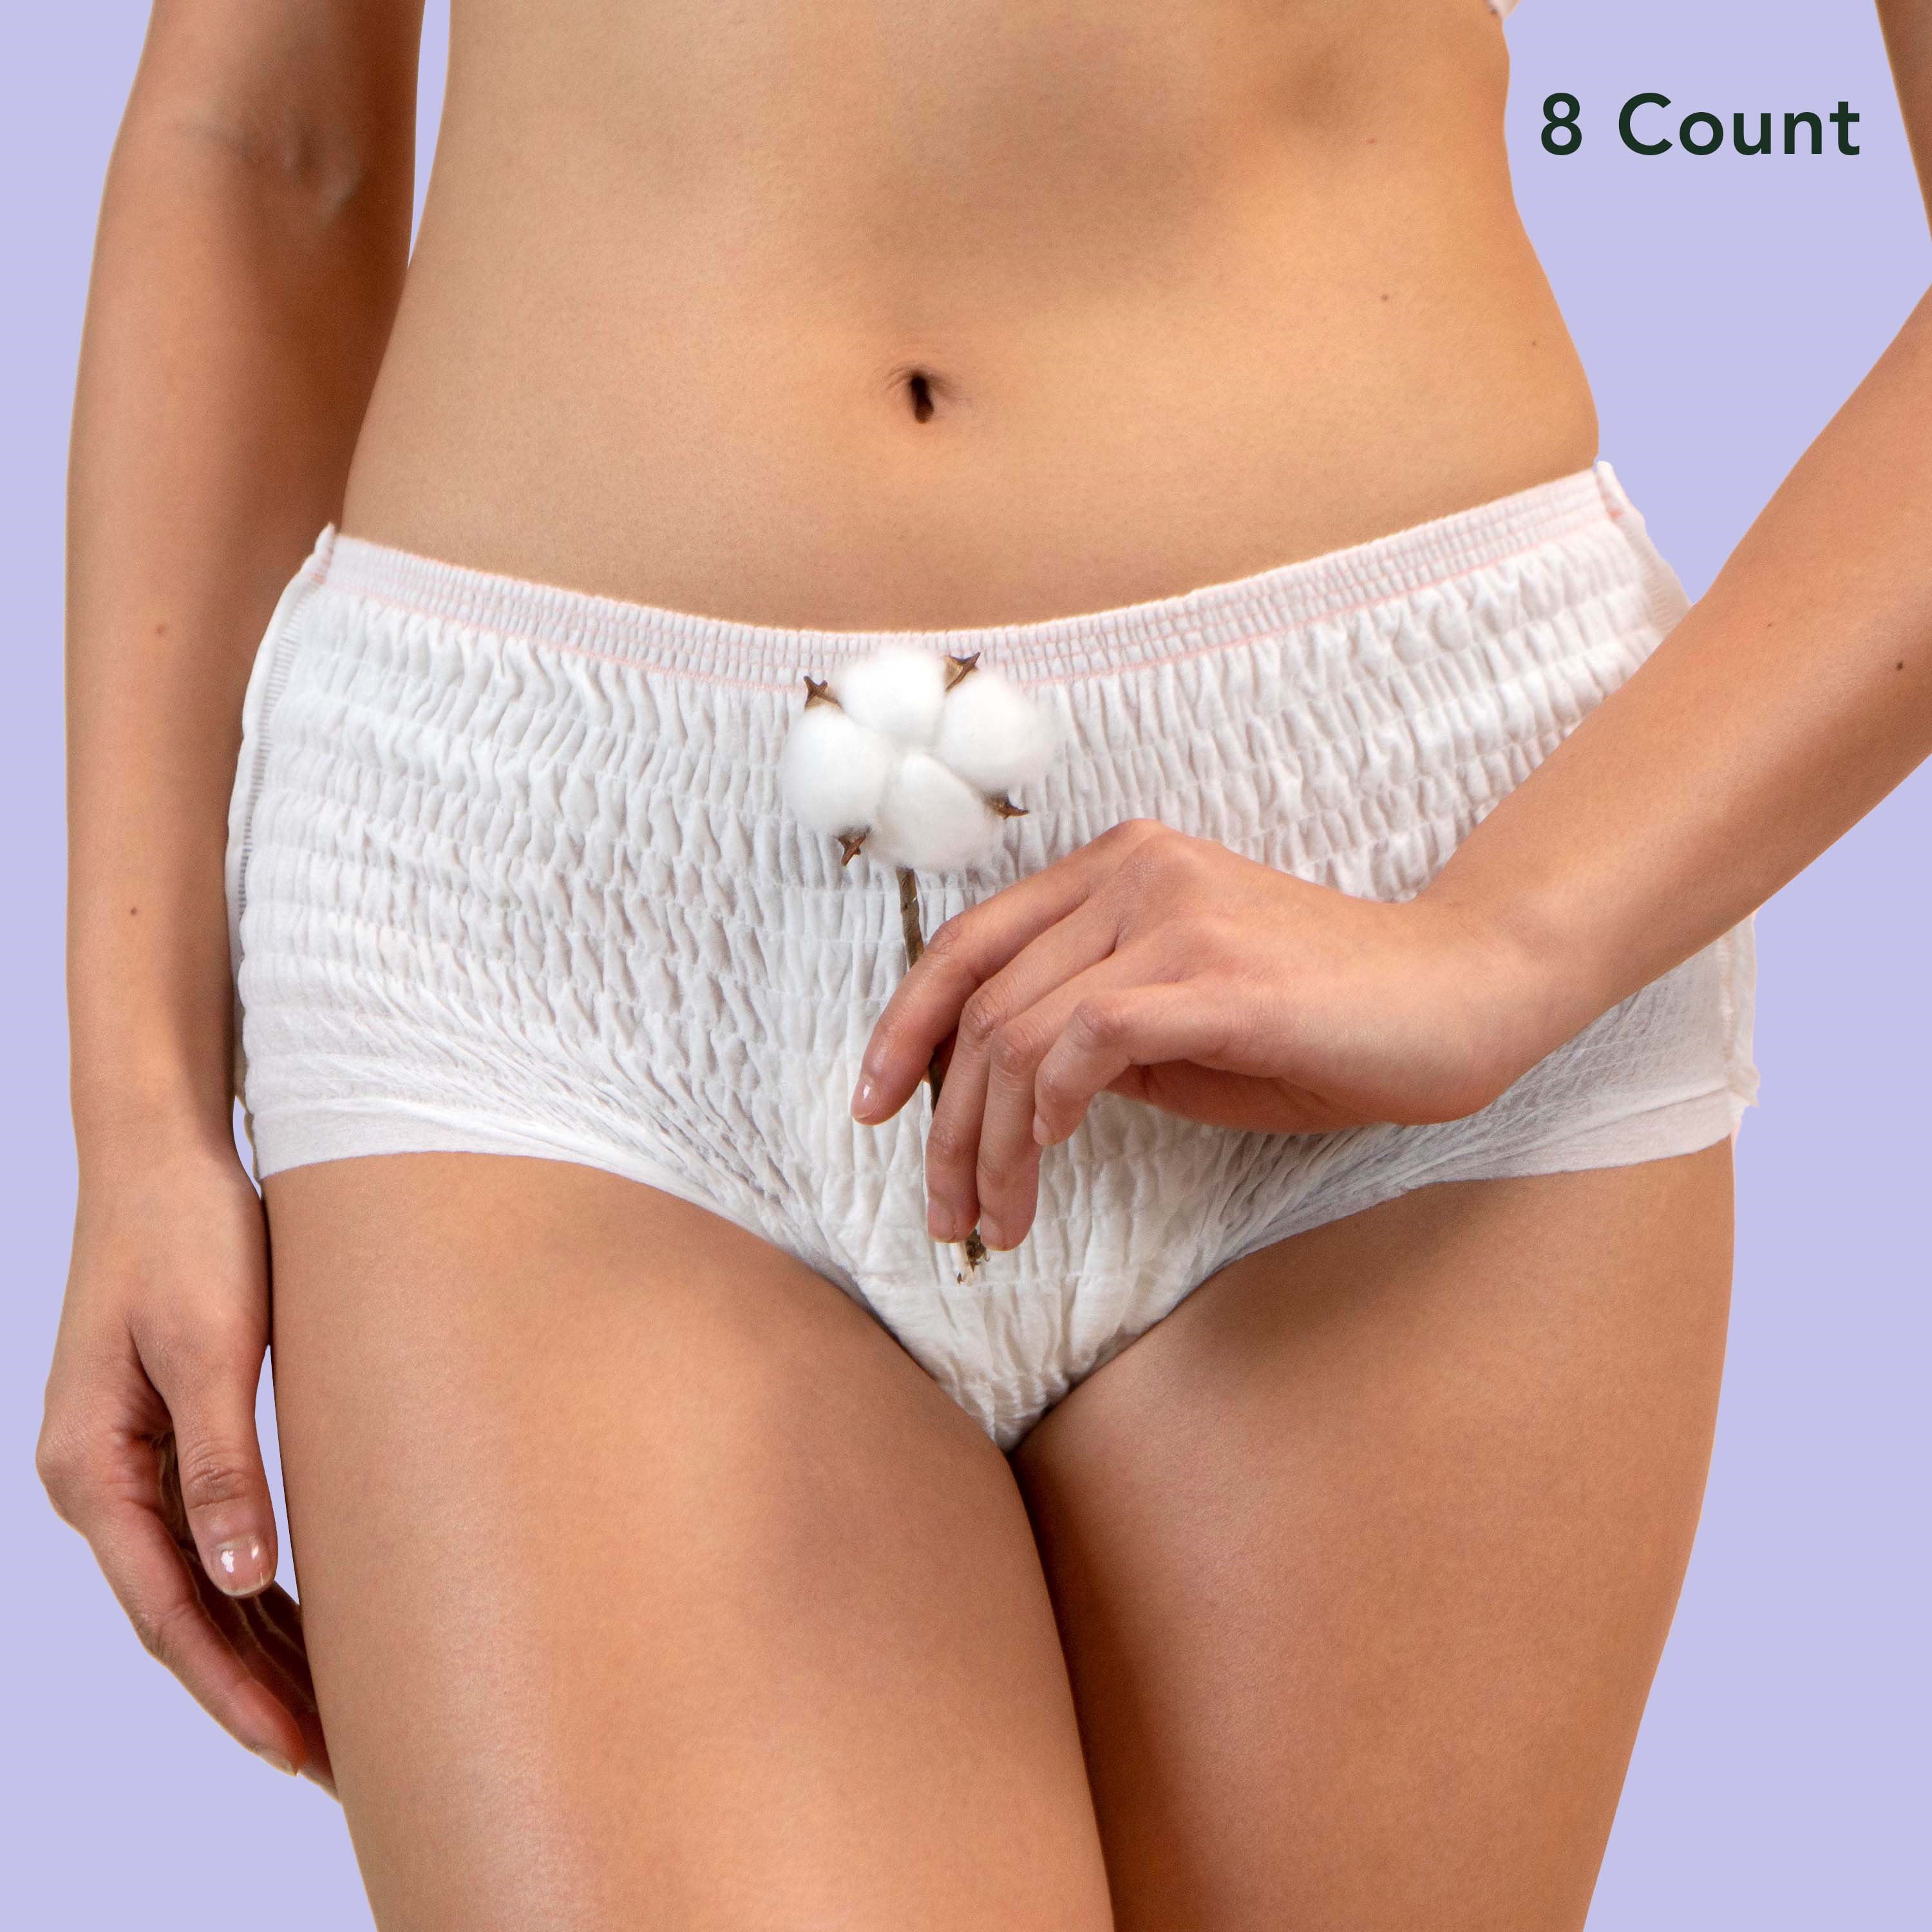 Cotton disposable period panties for women (L-XL) PACK OF 5 at Rs